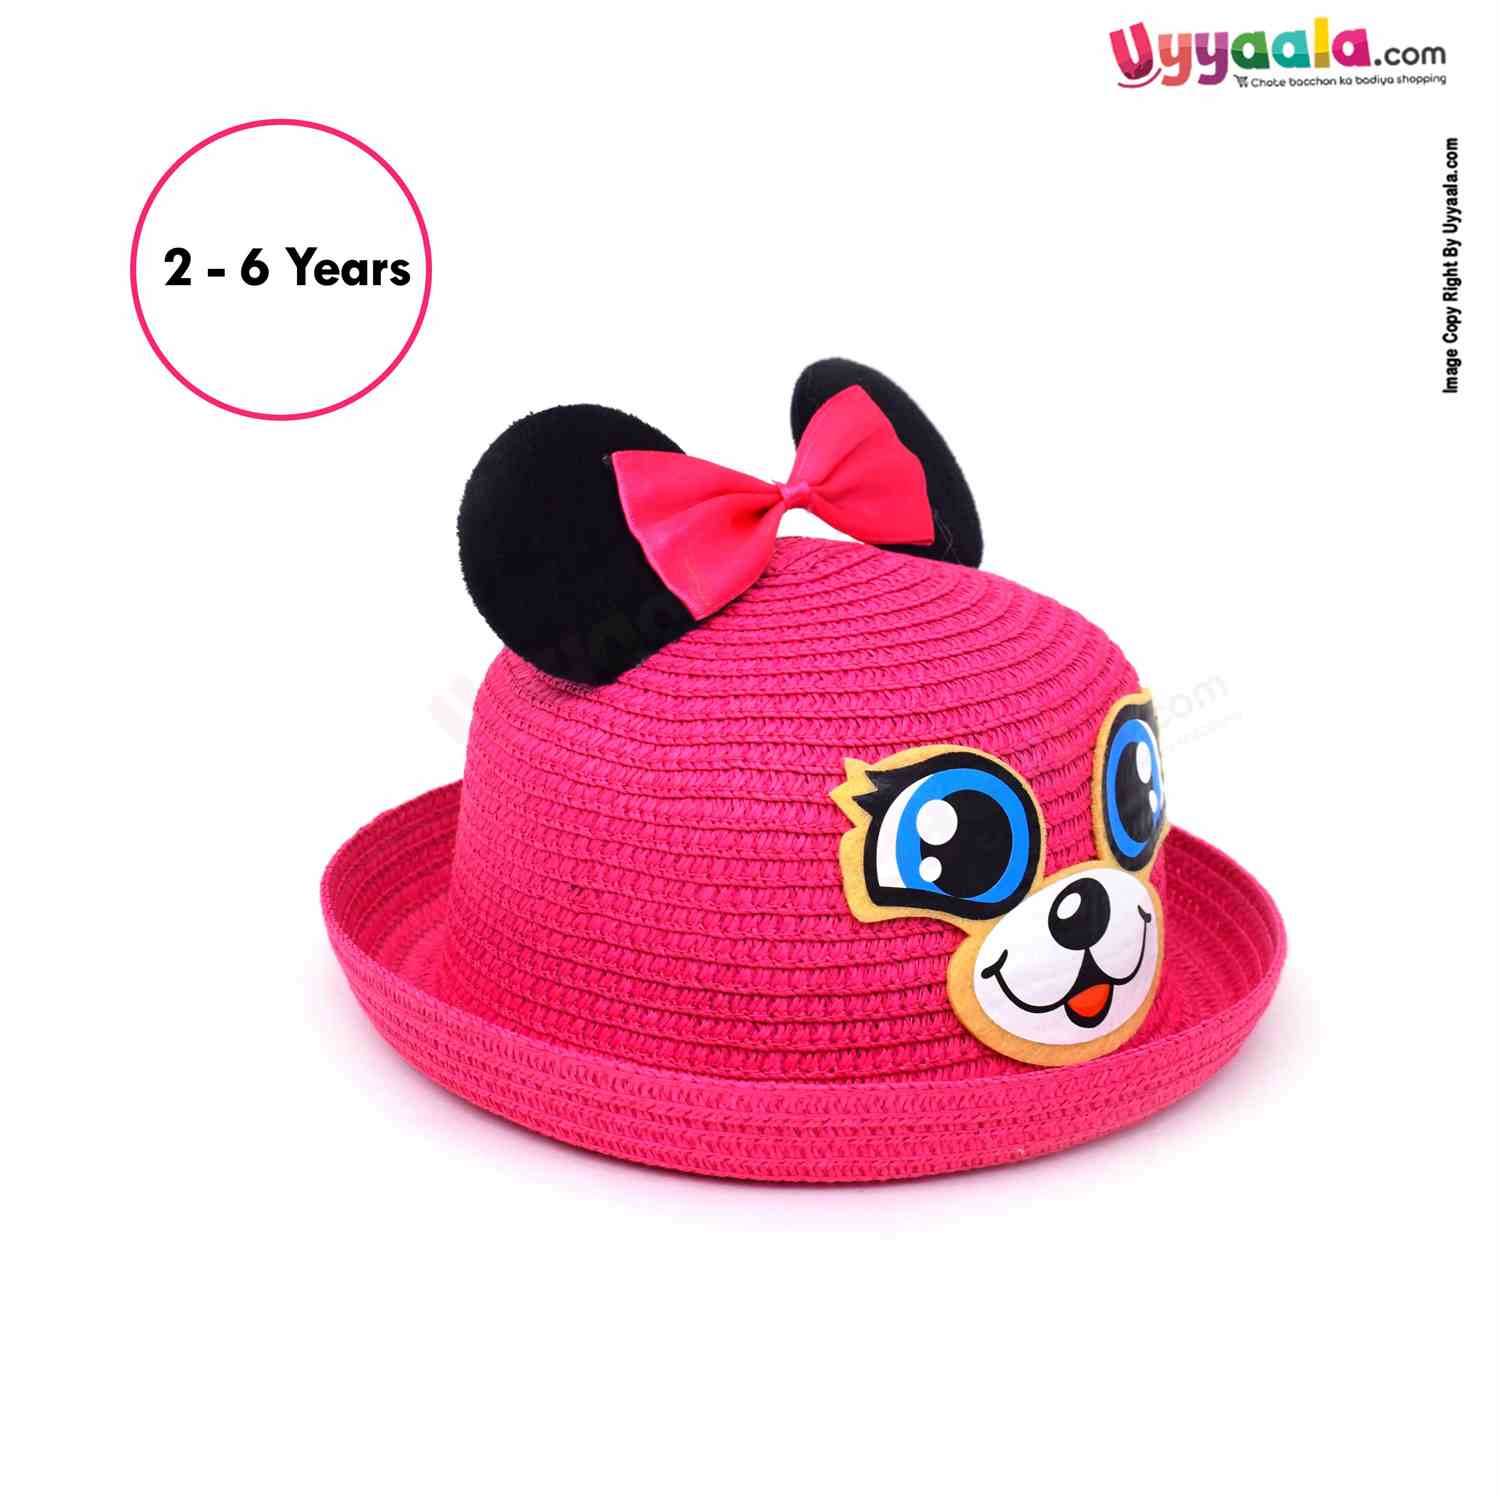 Straw Hat for Kids with Cartoon Print  2+Y Age - Pink